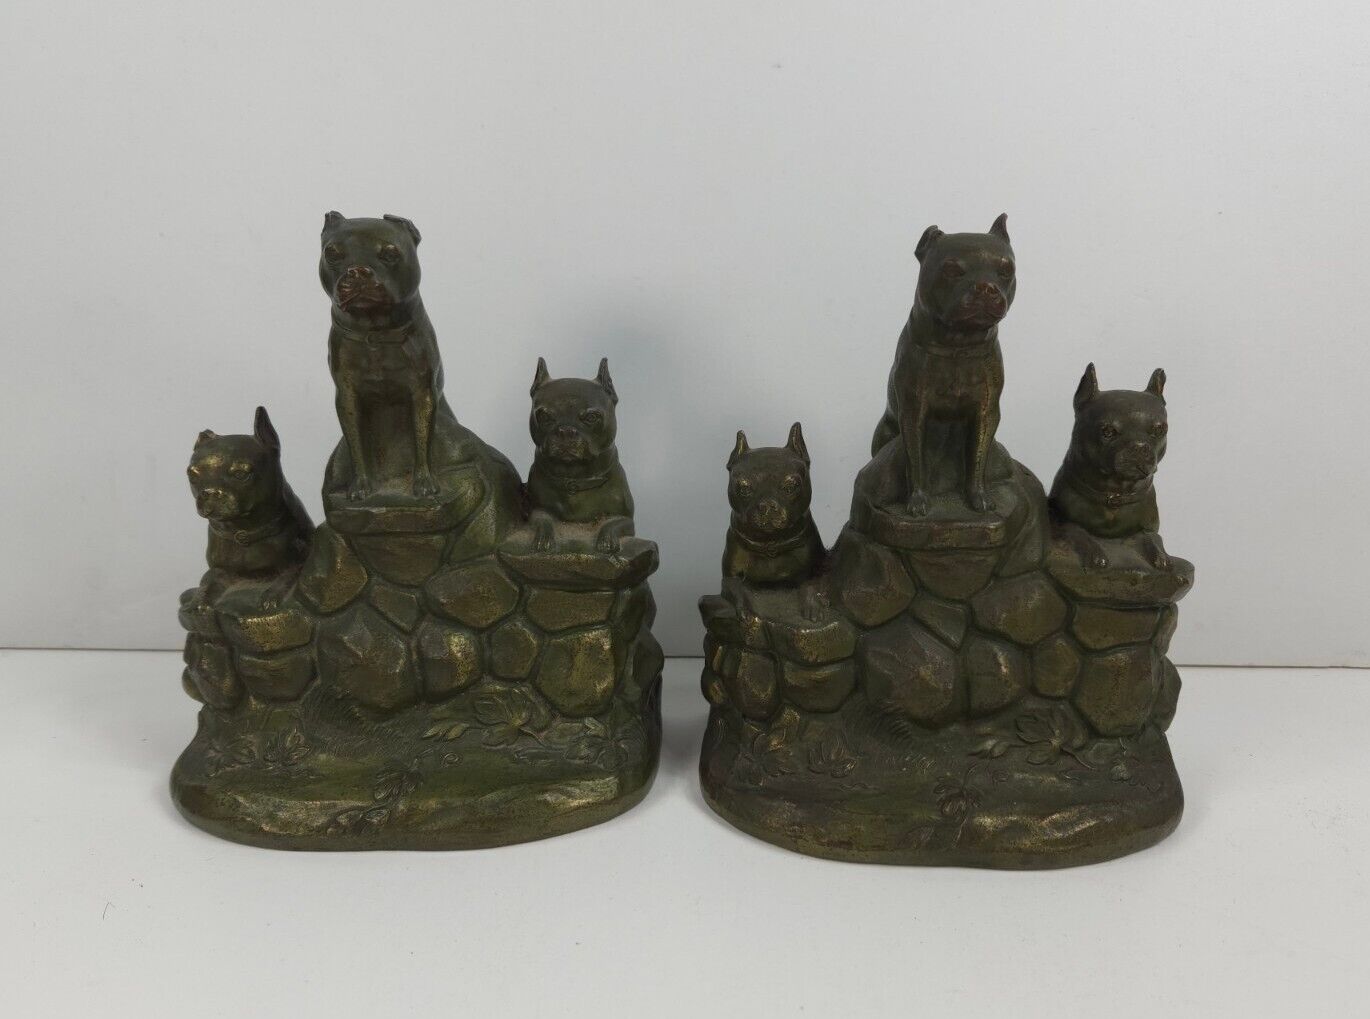 Jennings Brothers # 1926 Boston Terrier Bronze Bookends 1920s-30s